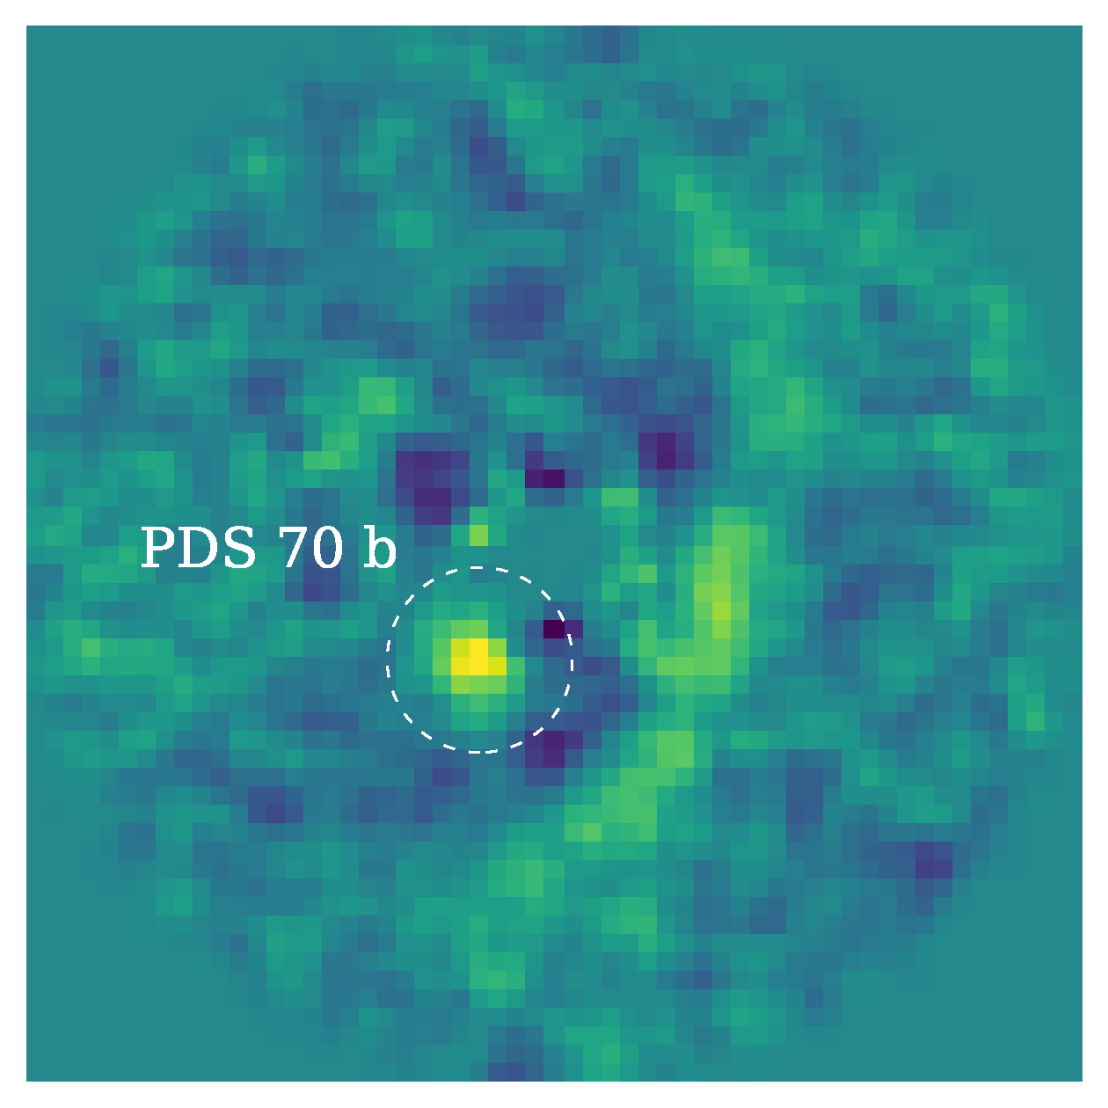 Enlarged view: Image of the PDS 70 planetary system and circumstellar disk, containing the two nascent planets PDS 70 b and PDS 70 c.